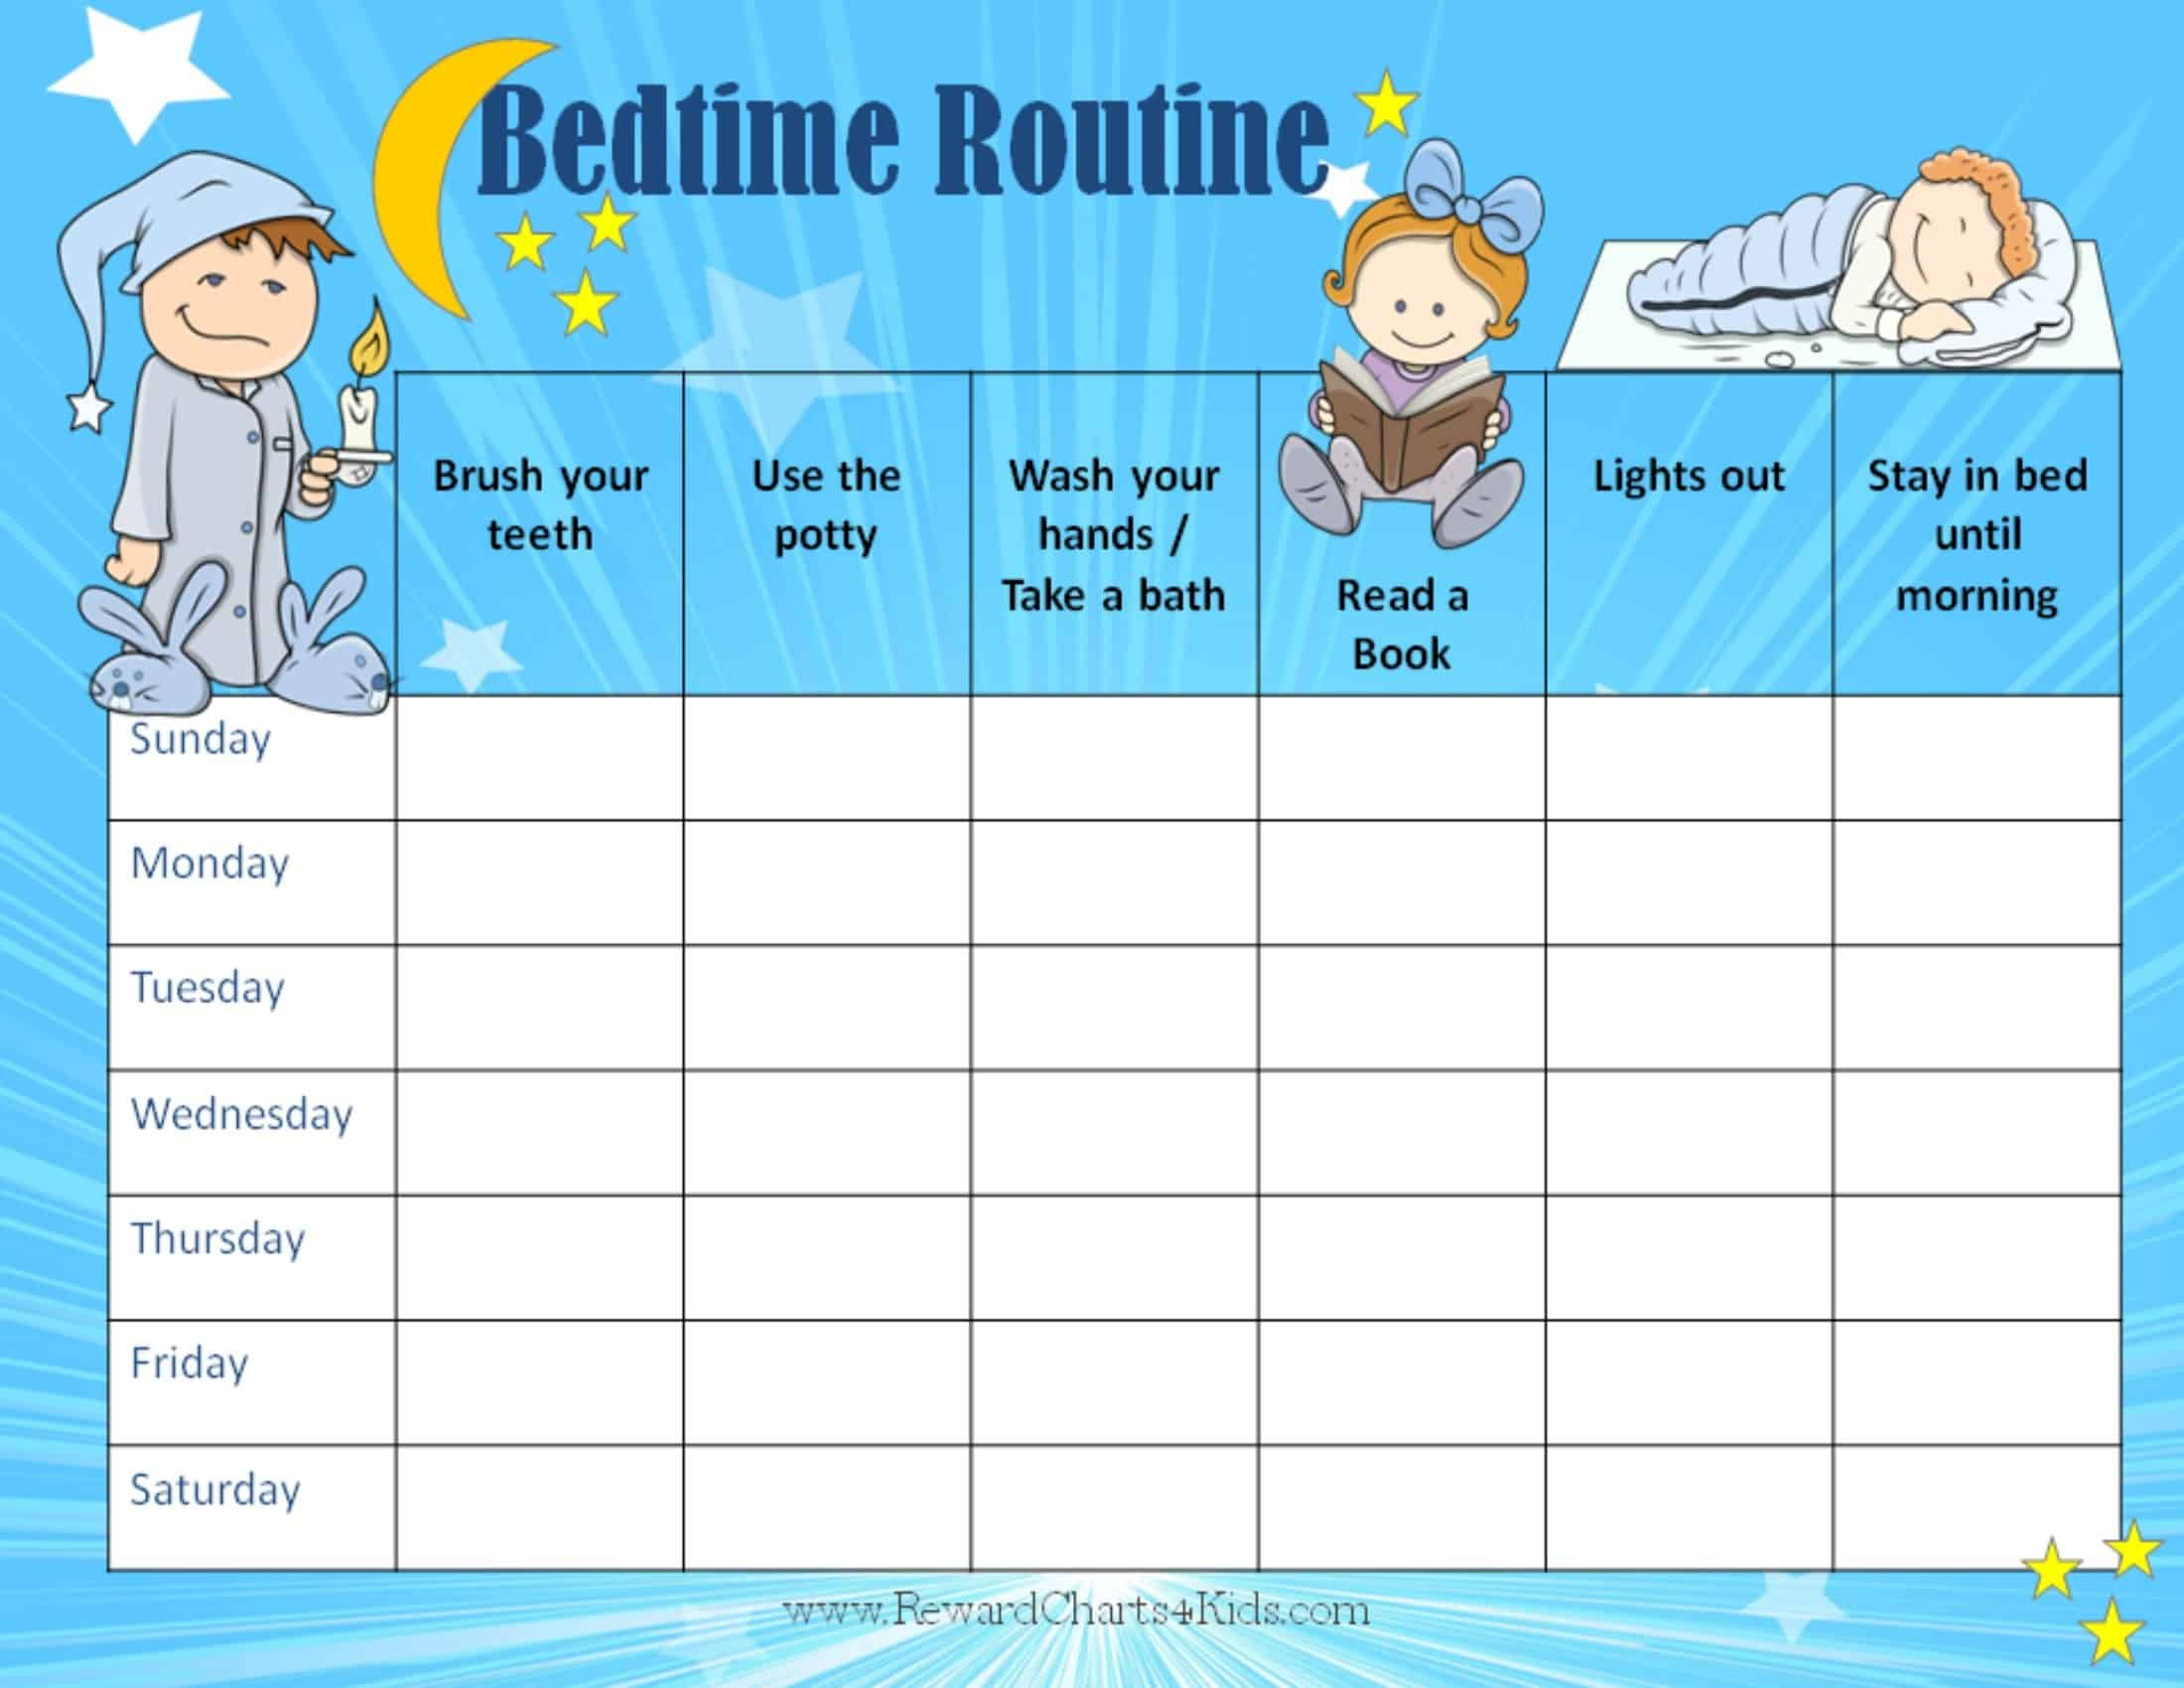 Free Printable Bedtime Routine Chart | Customize Online Then Print - Children&amp;amp;#039;s Routine Charts Free Printable